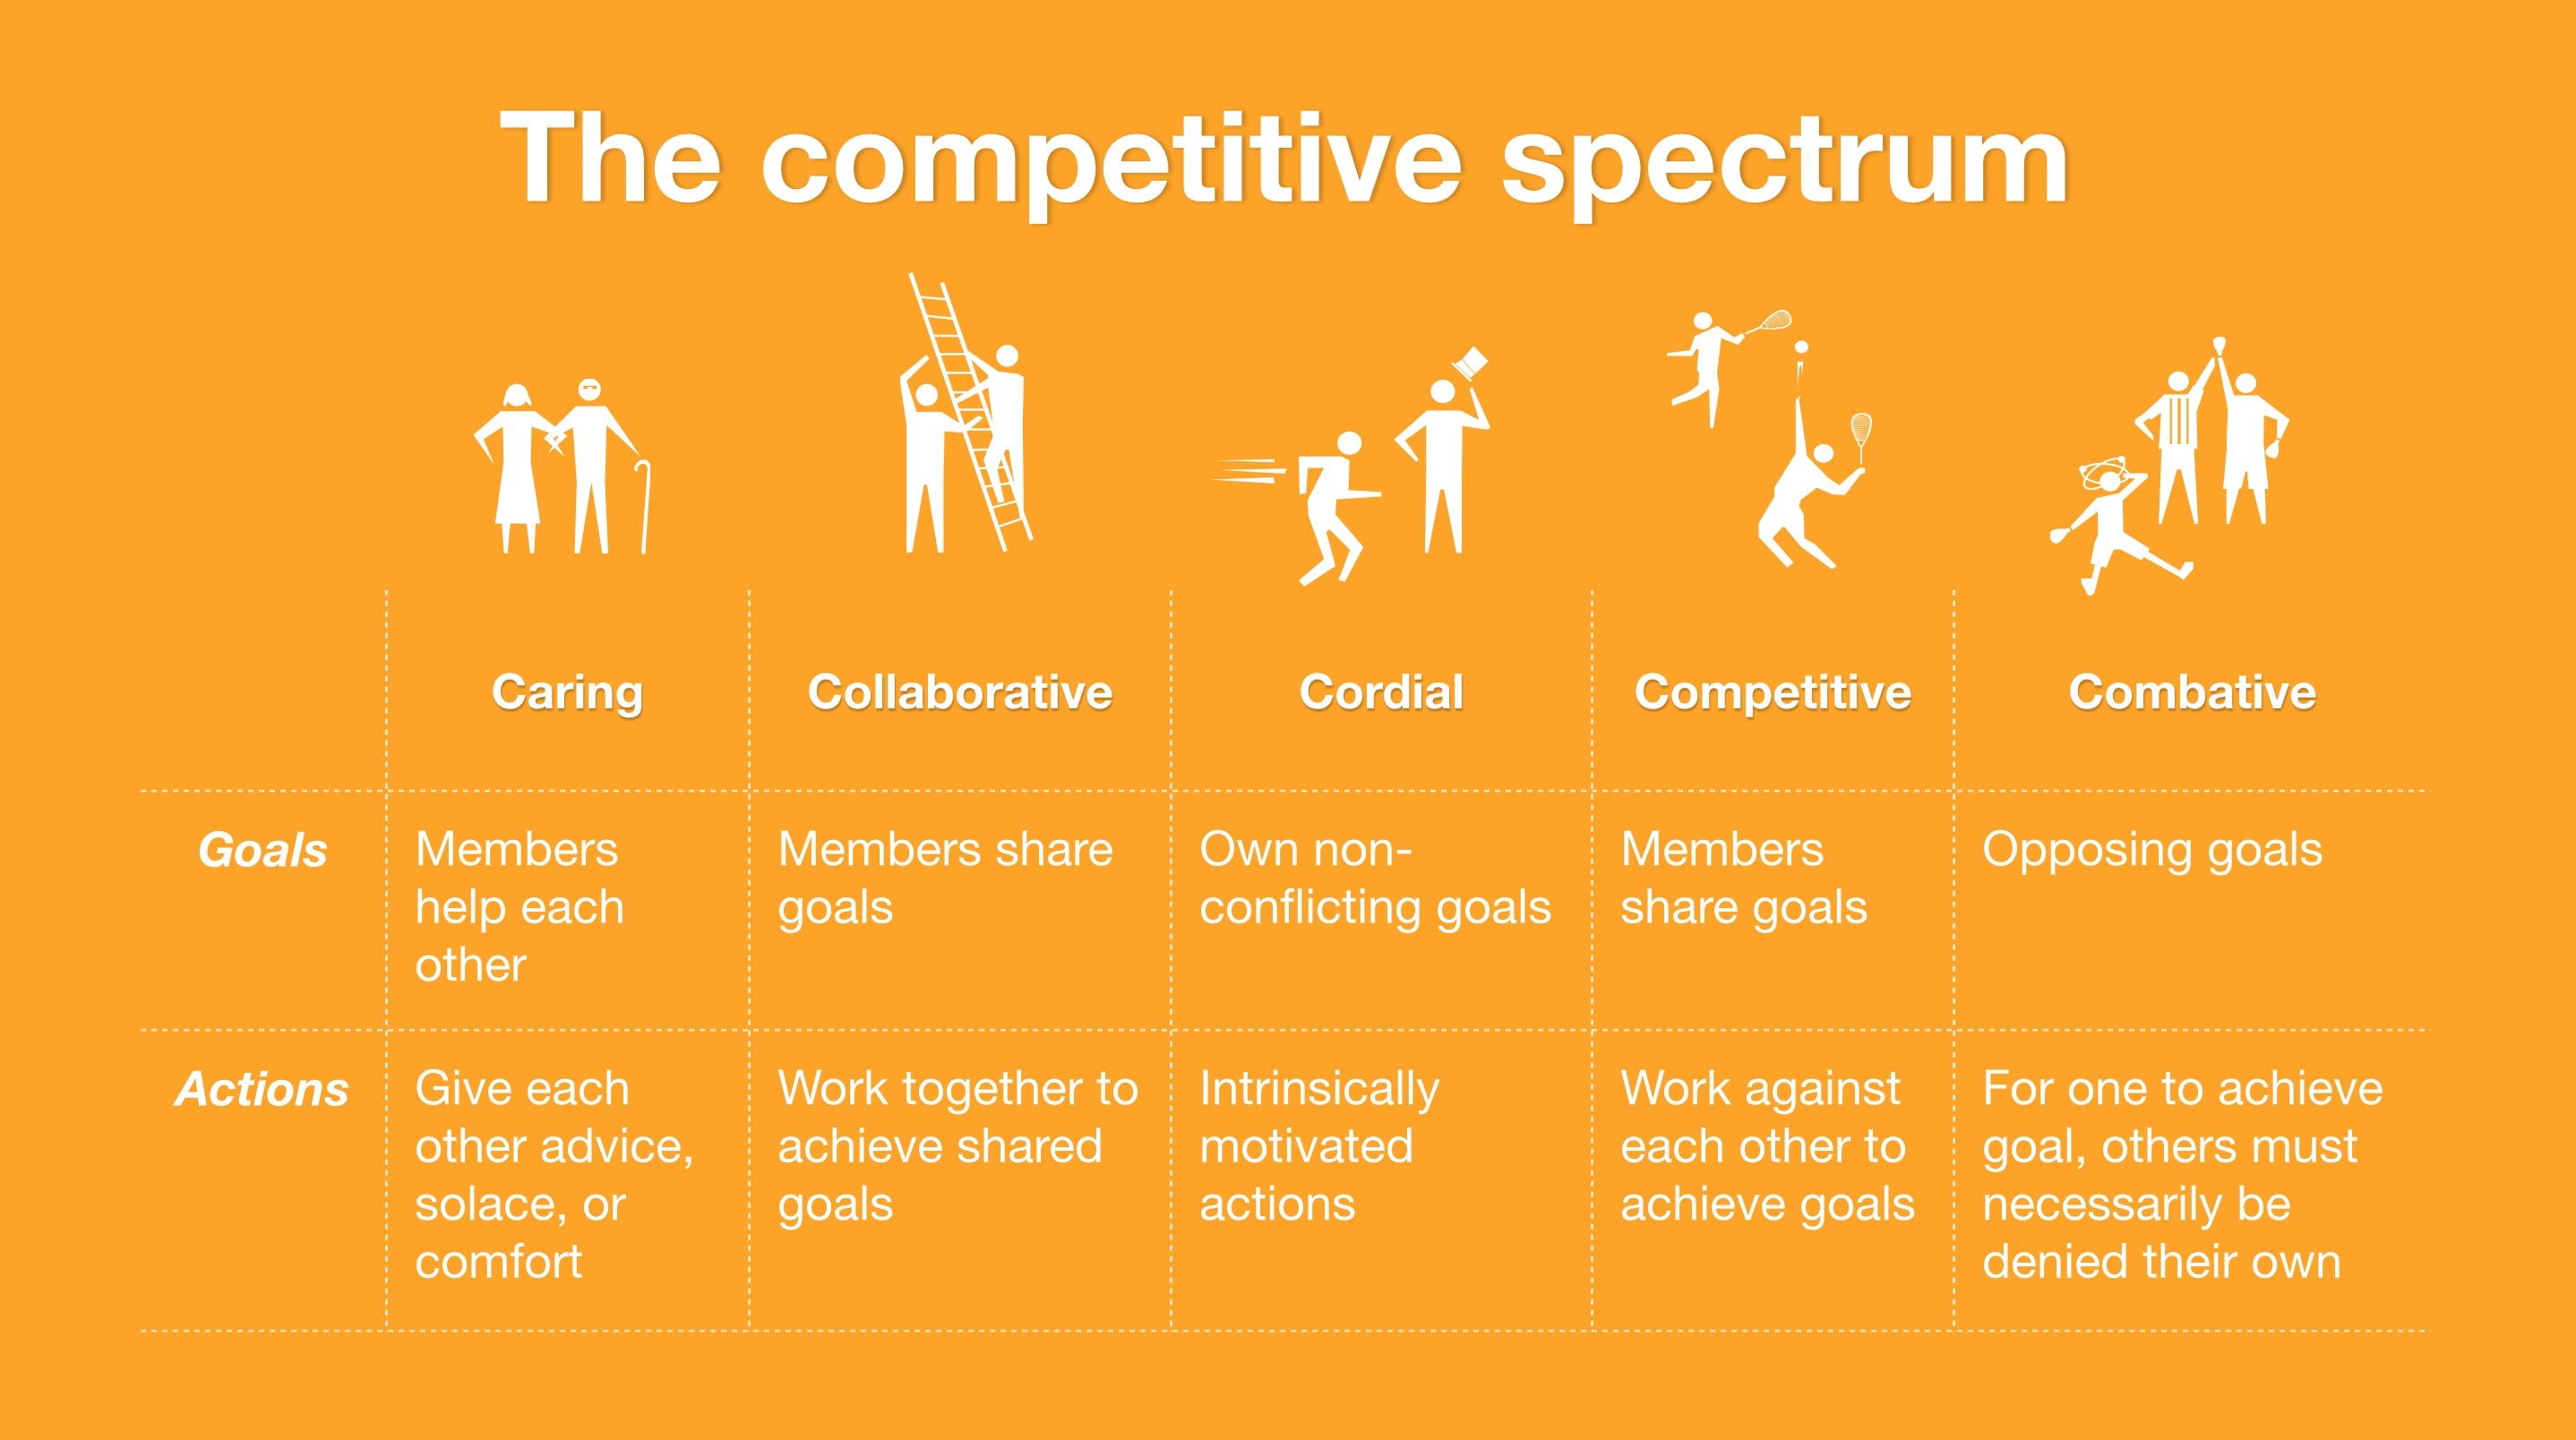 The competitive spectrum